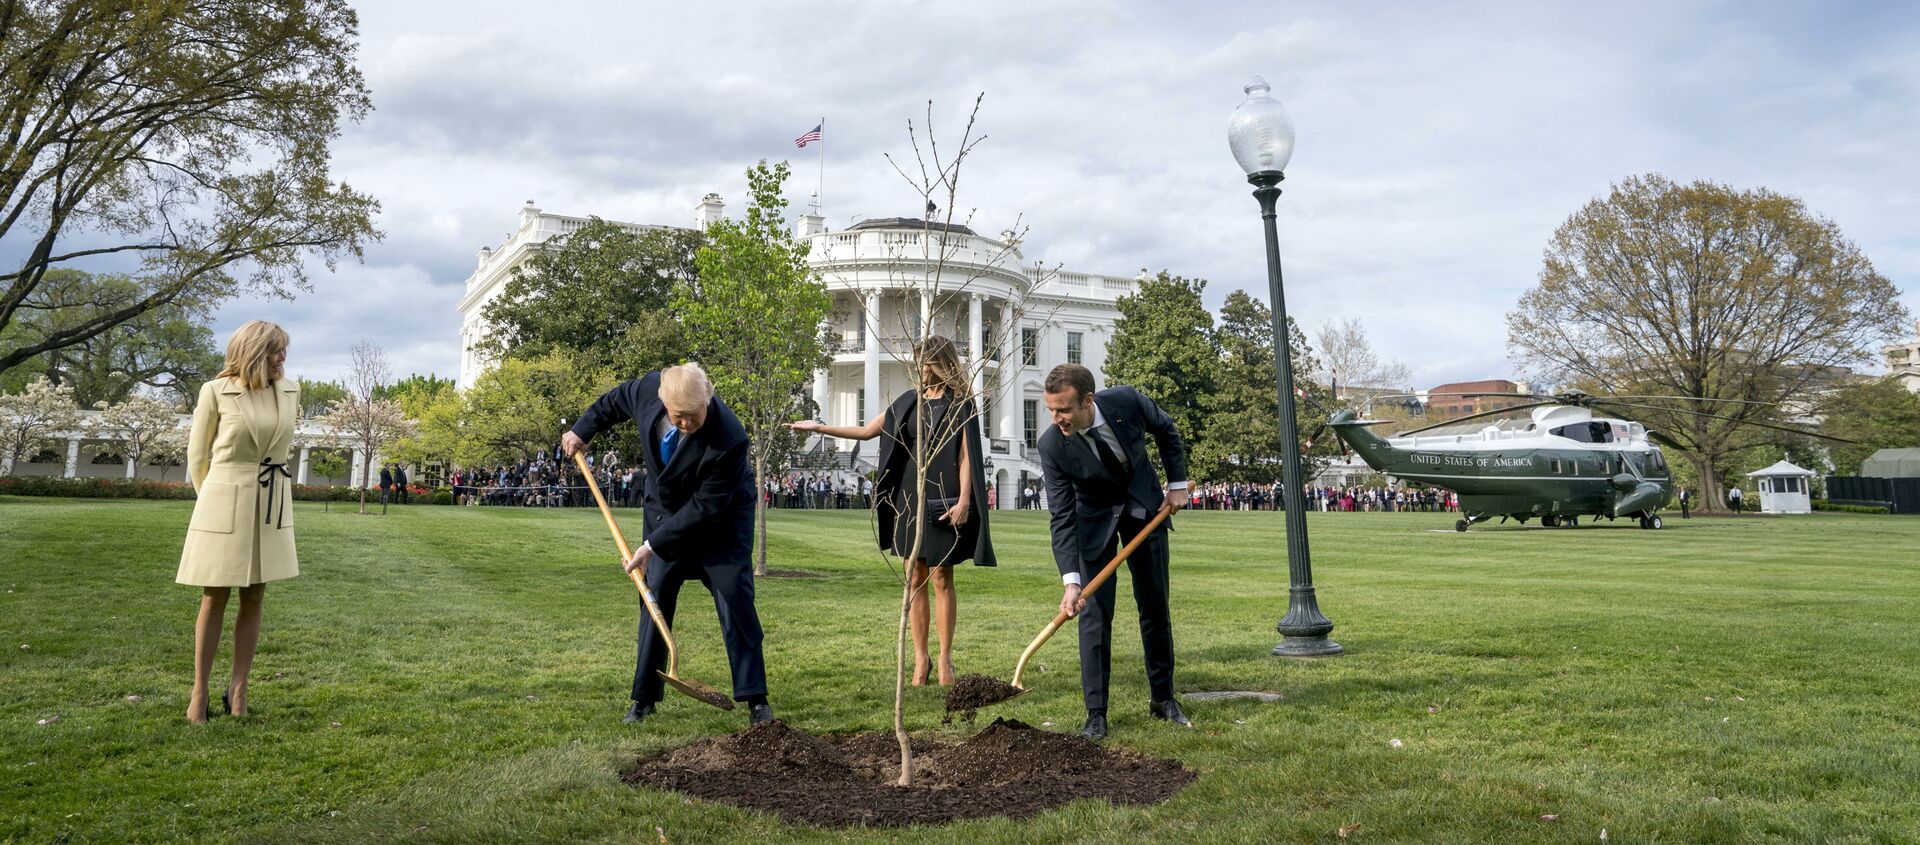 n this April 23, 2018, file photo, first lady Melania Trump, second from right, and Brigitte Macron, left, watch as President Donald Trump and French President Emmanuel Macron participate in a tree planting ceremony on the South Lawn of the White House in Washington - Sputnik International, 1920, 12.06.2019